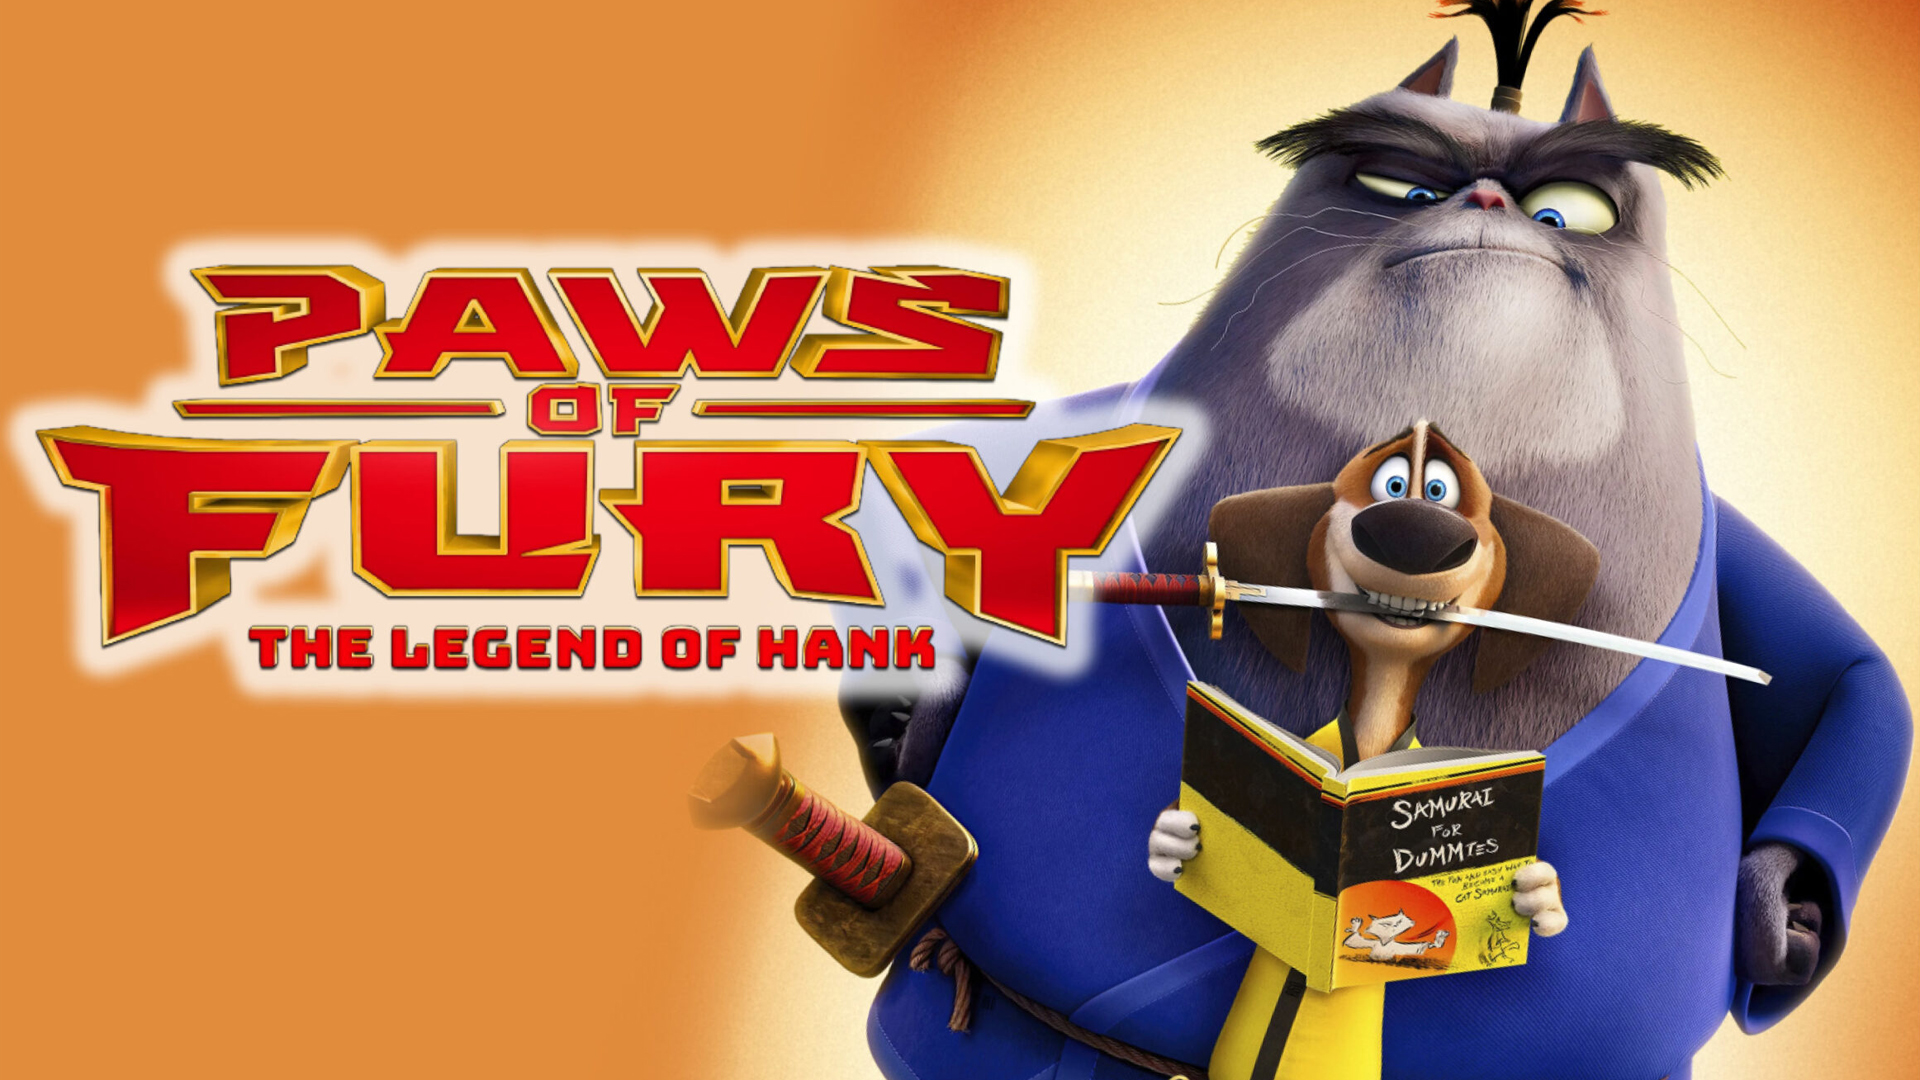 Free Family Film Paws of Fury: The Legend of Hank